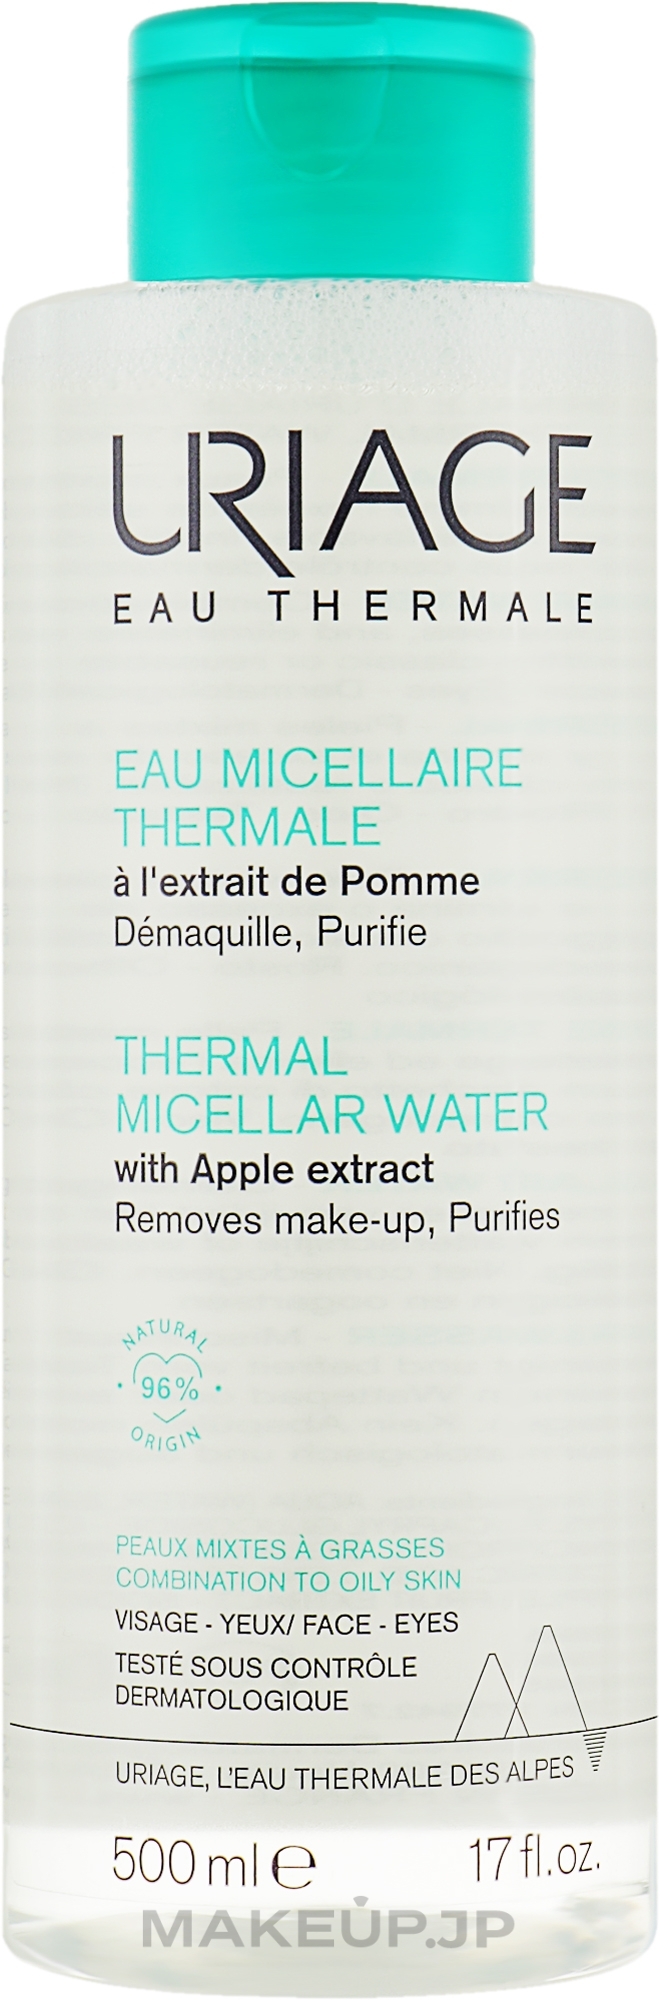 Micellar Water for Oily & Combination Skin - Uriage Thermal Micellar Water with Apple Extract — photo 500 ml